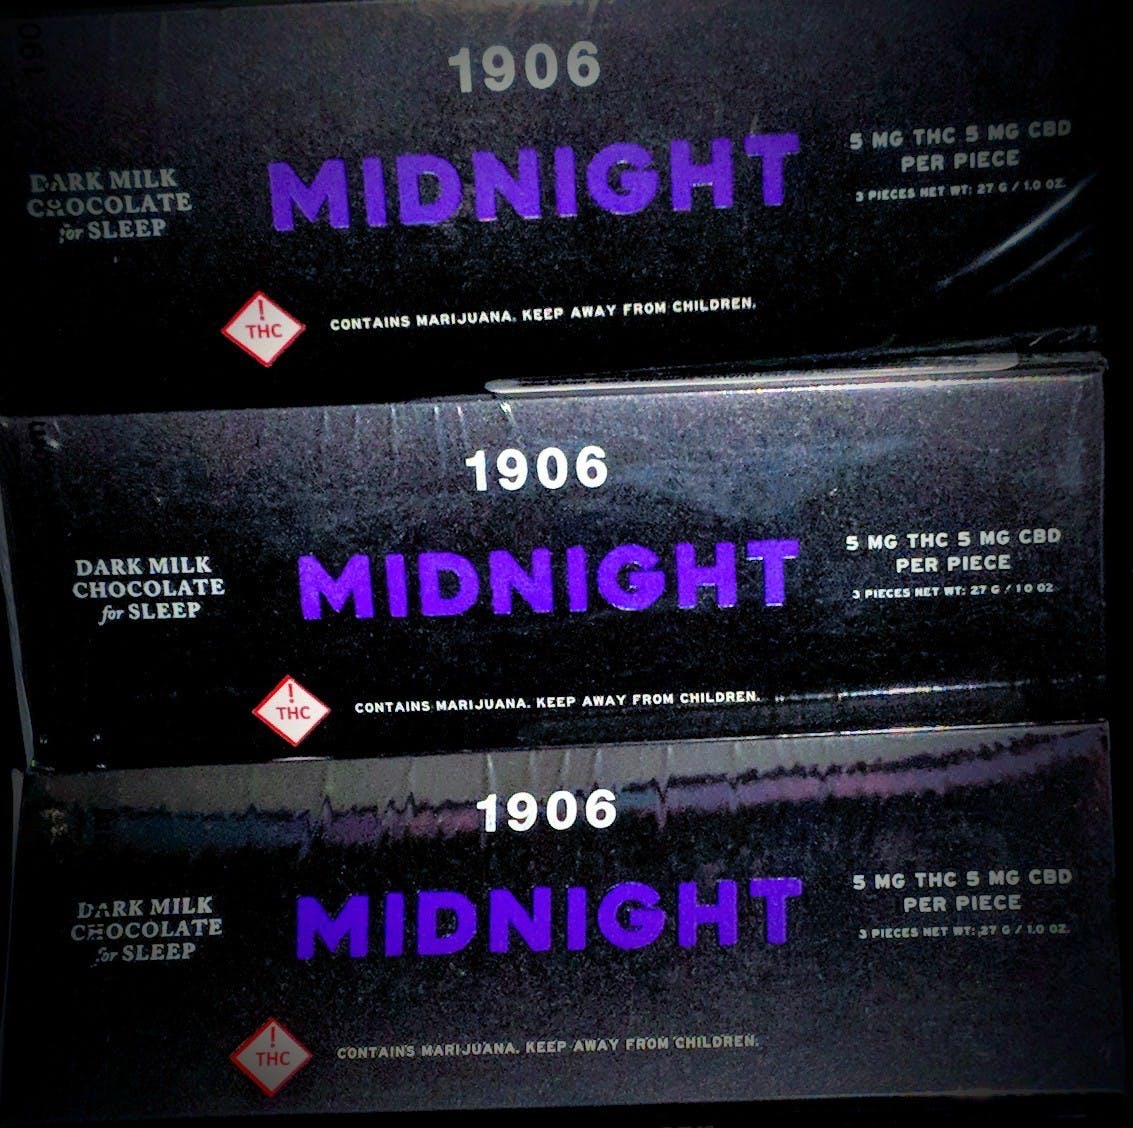 edible-midnight-chocolate-3-pack-1906-new-highs